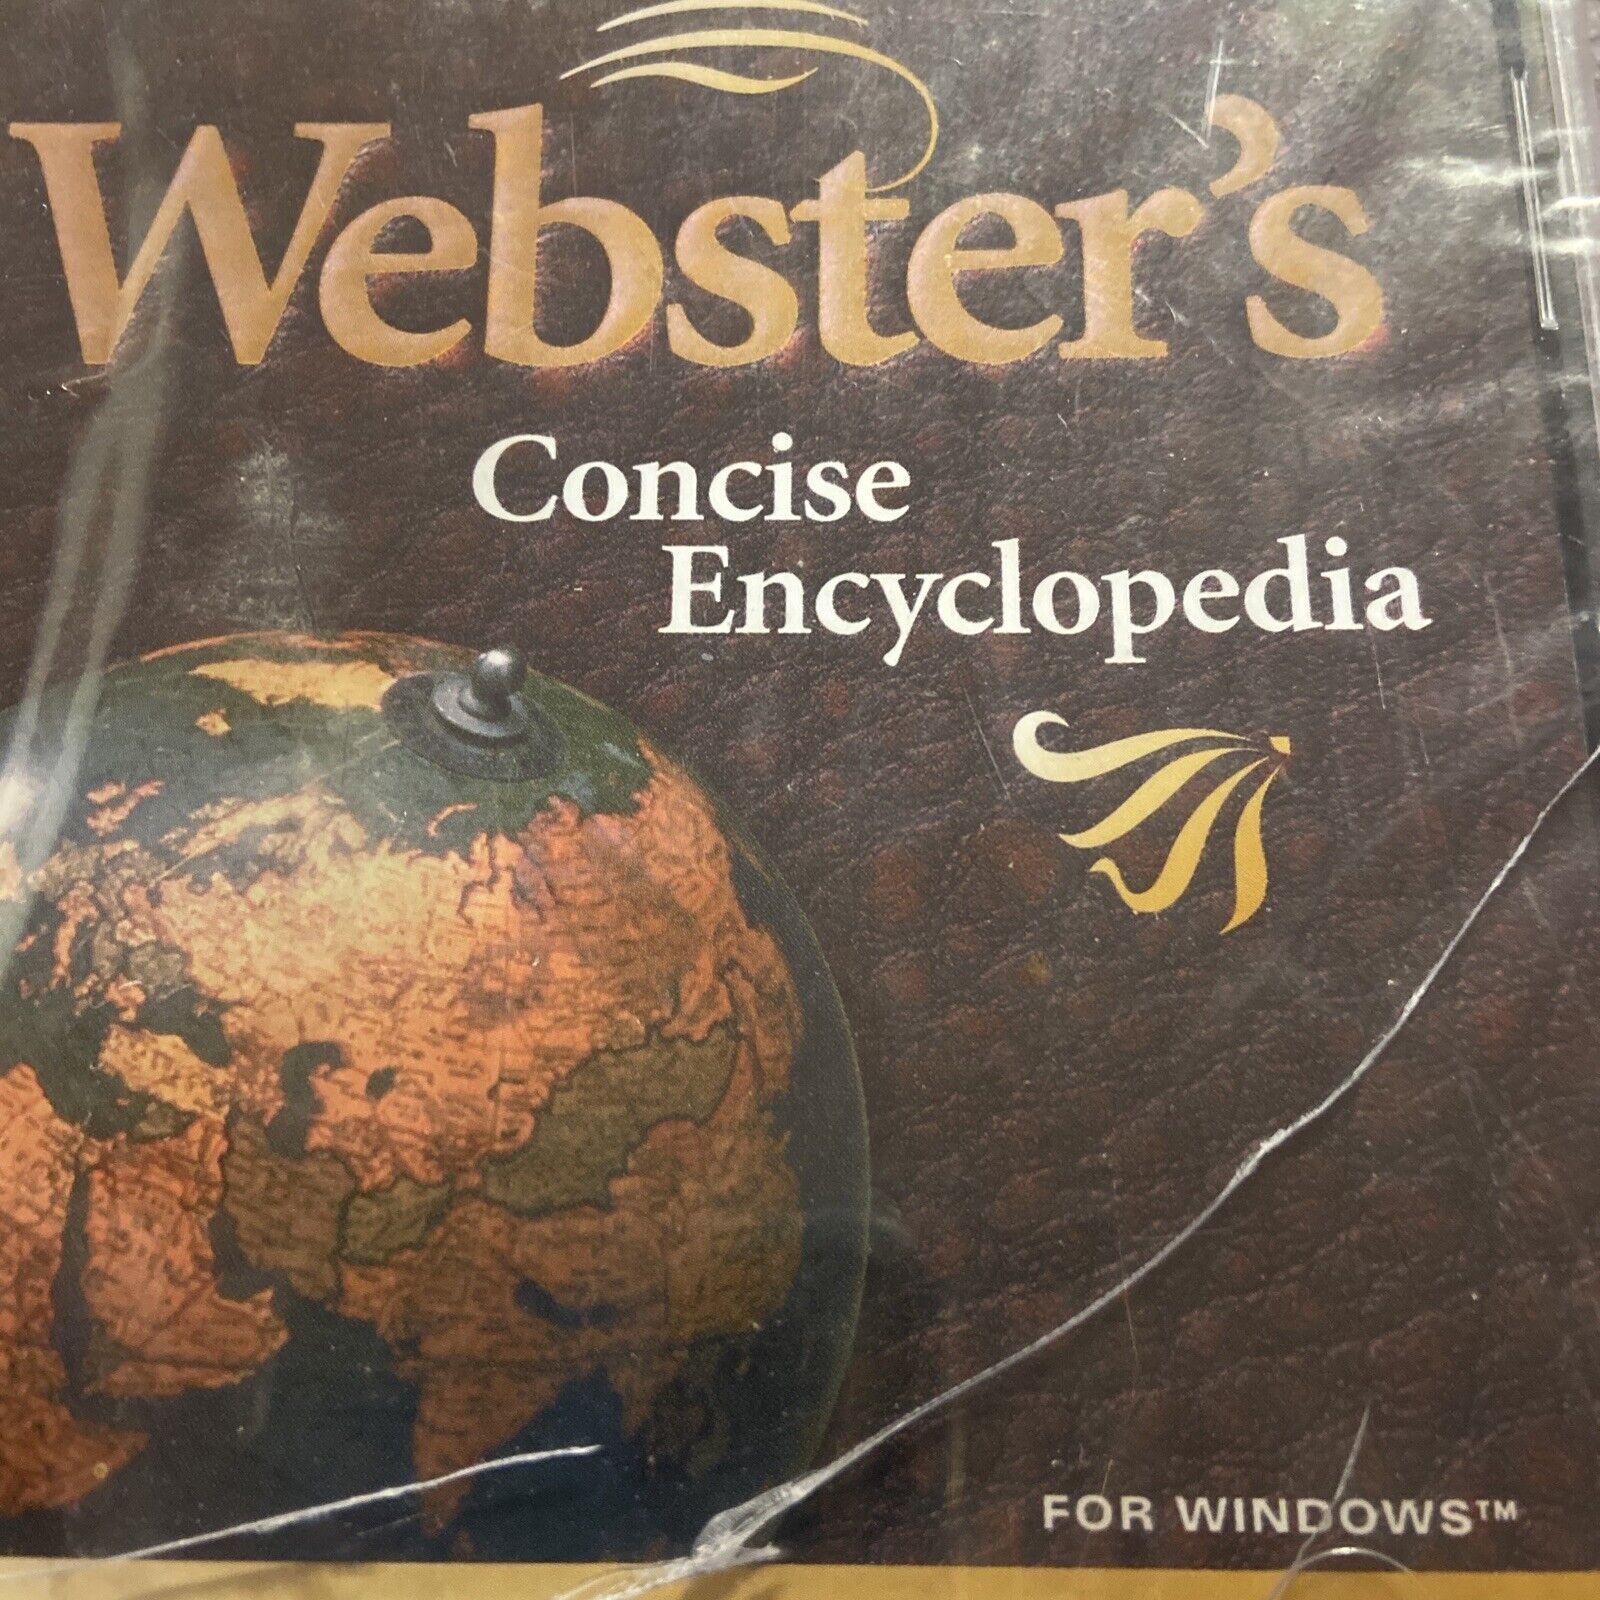 Webster's Concise Encyclopedia PC CD-ROM 1996 Windows 95/3.1 720286103805 SEALED